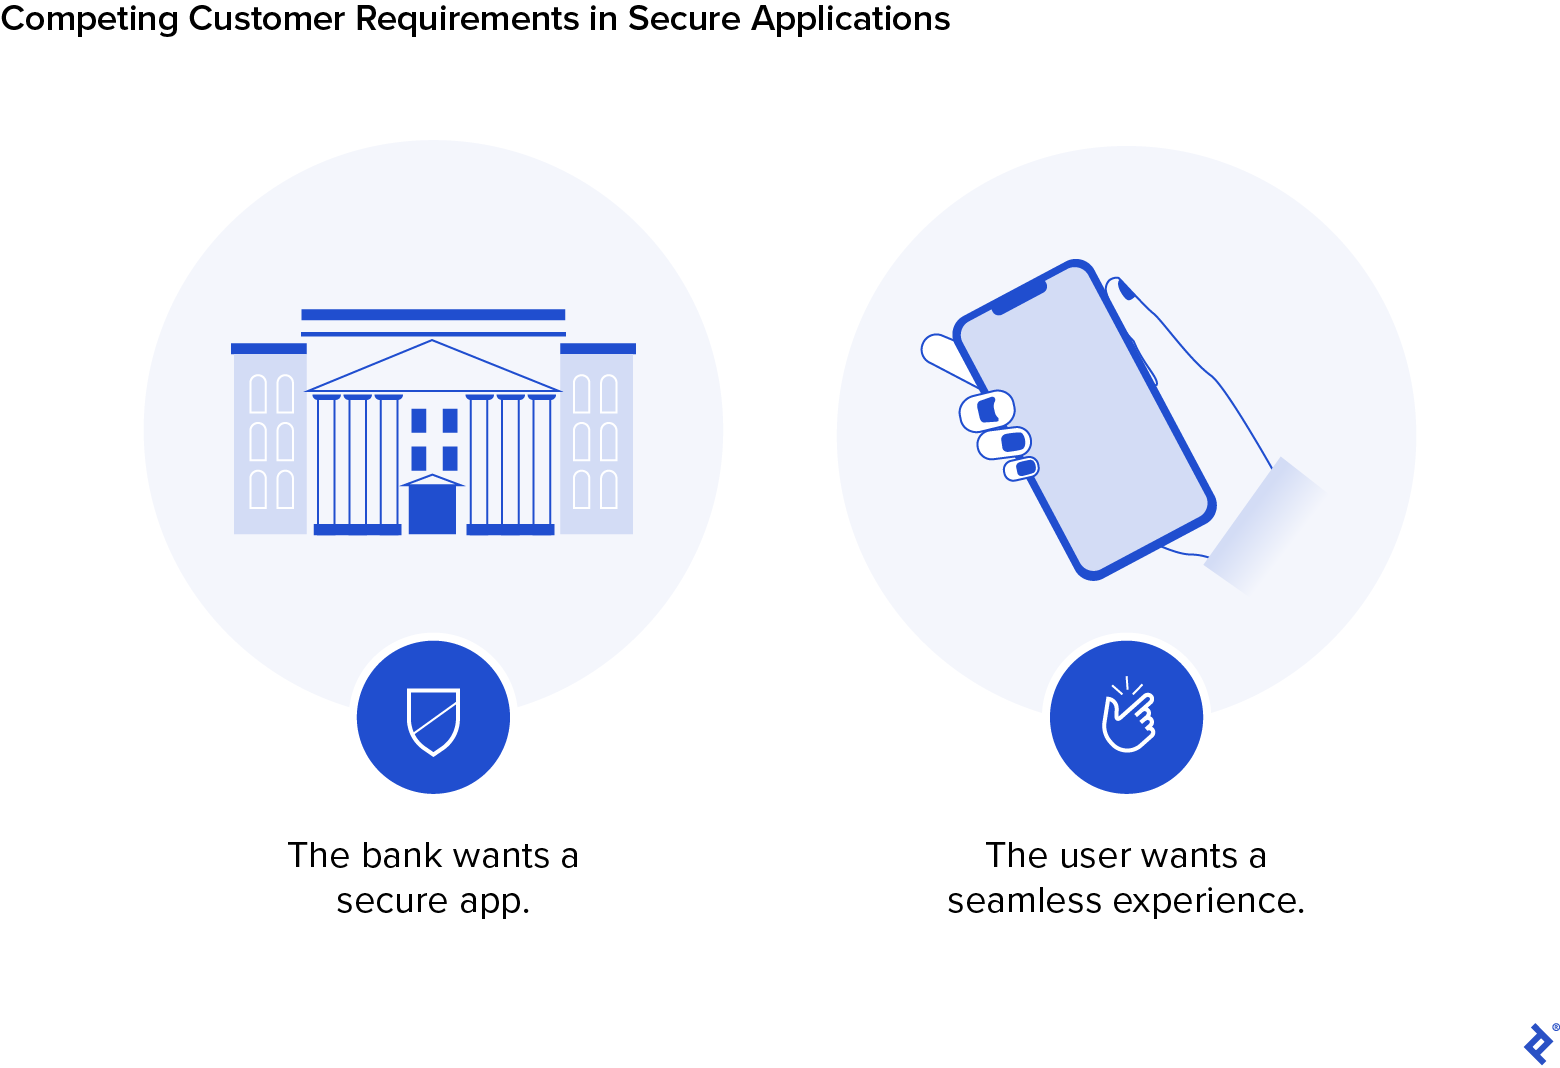 An icon representing a bank is labeled with the text "The bank wants a secure app." An icon displaying a mobile phone is labeled with the text "The user wants a seamless experience."